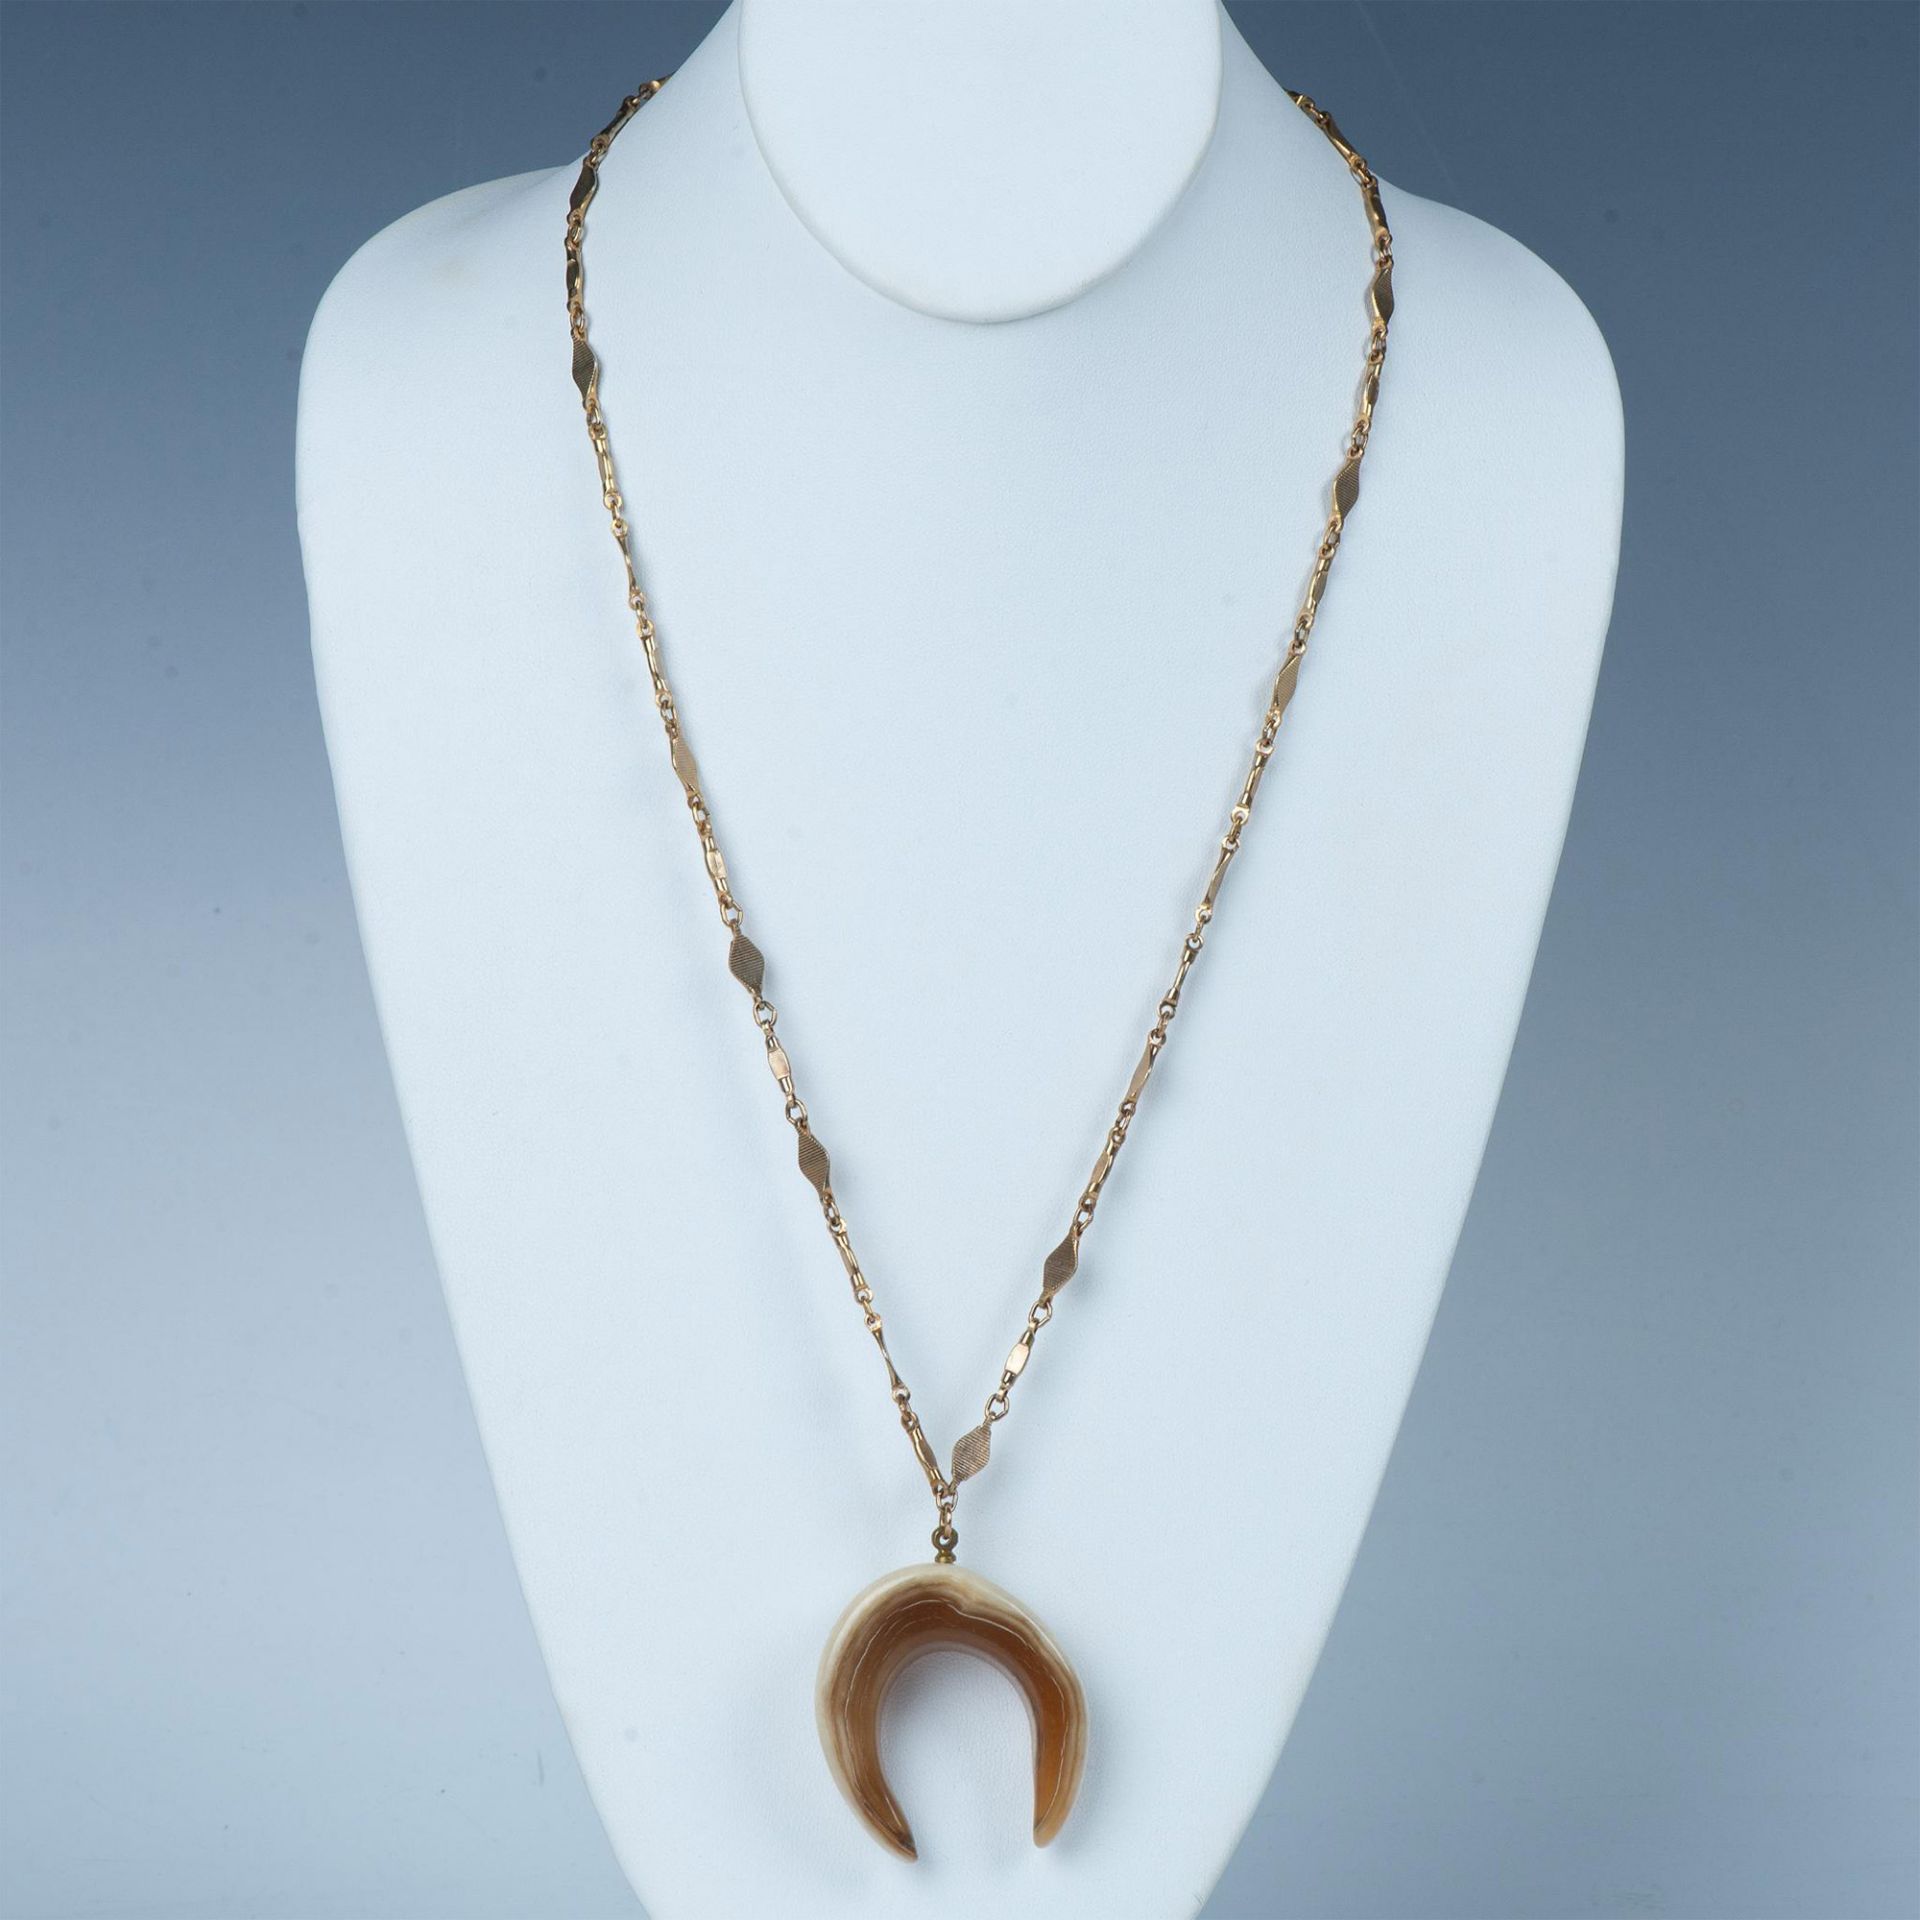 2pc Petrified Wood, Horn and Bead Necklaces - Image 3 of 6